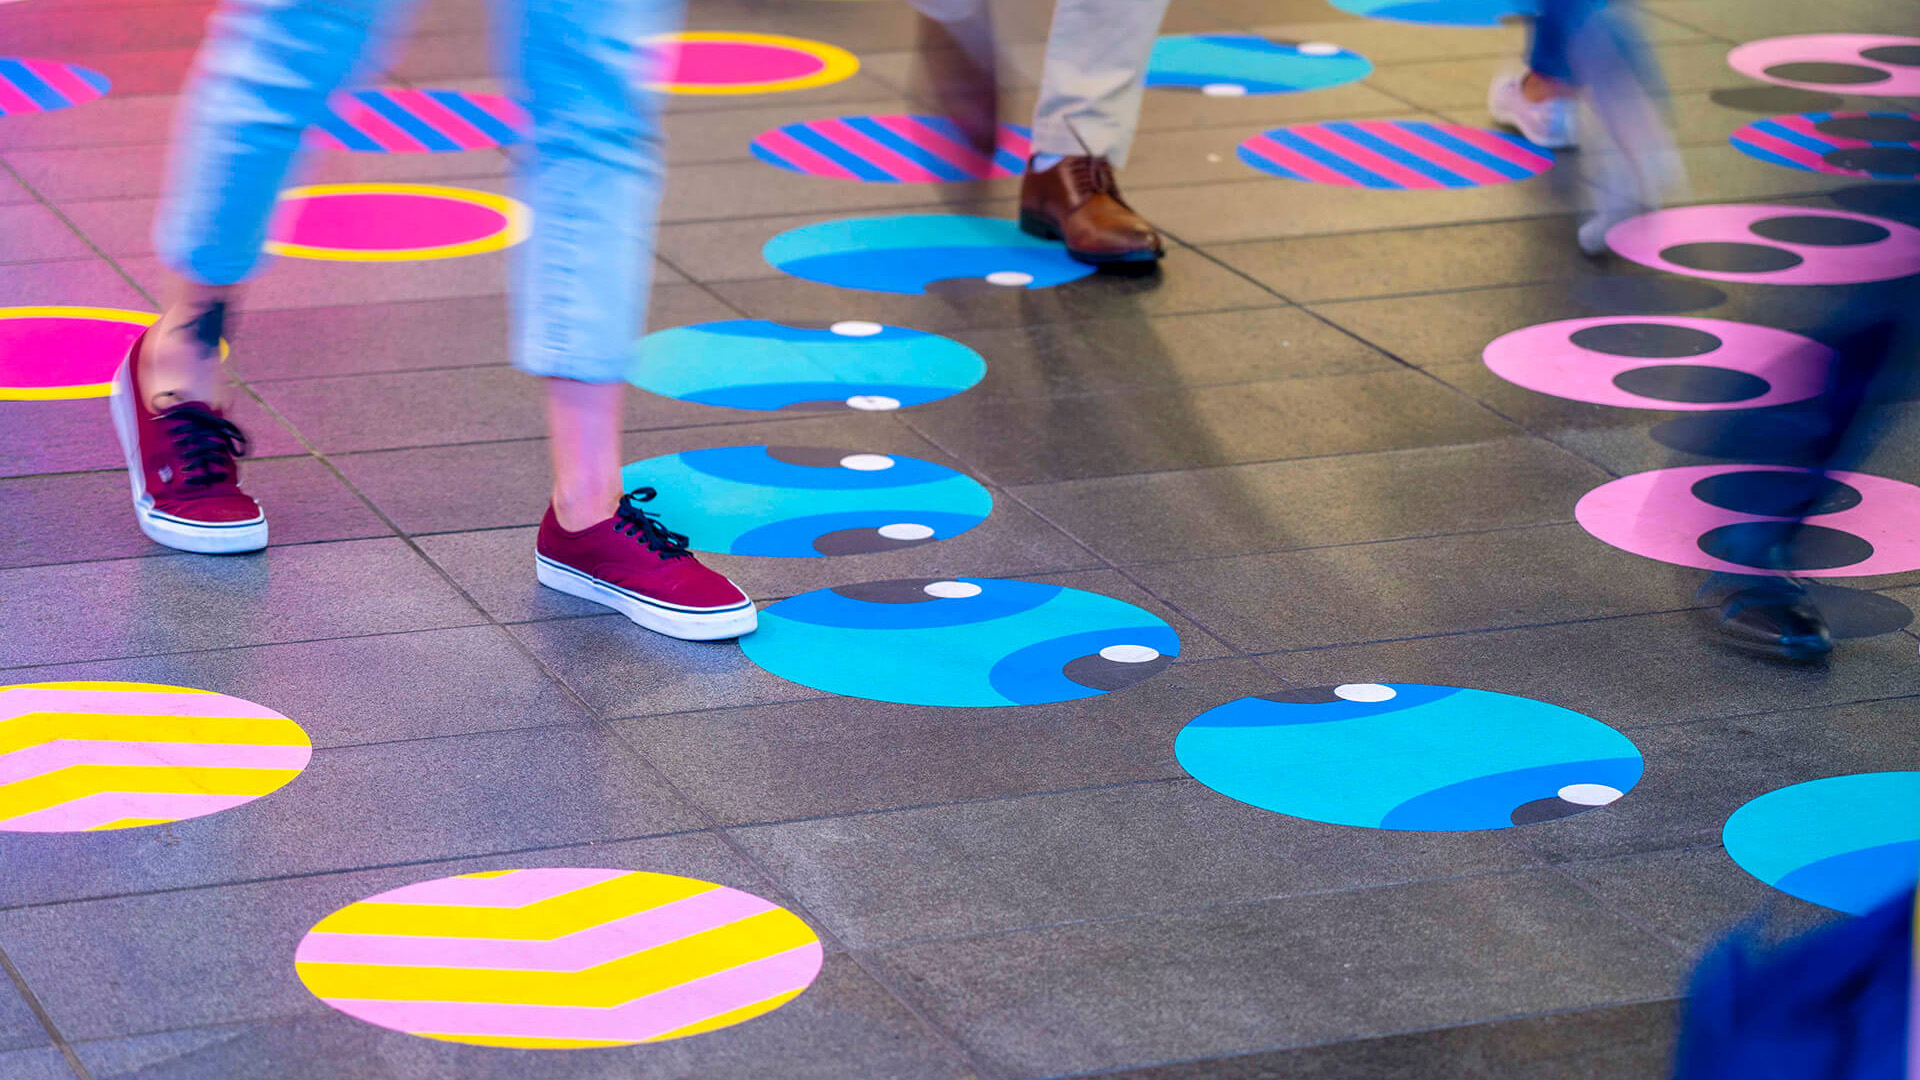 Shoppers enjoying a multicoloured placemaking artistic mural at World Square - a World of Colour by VANDAL